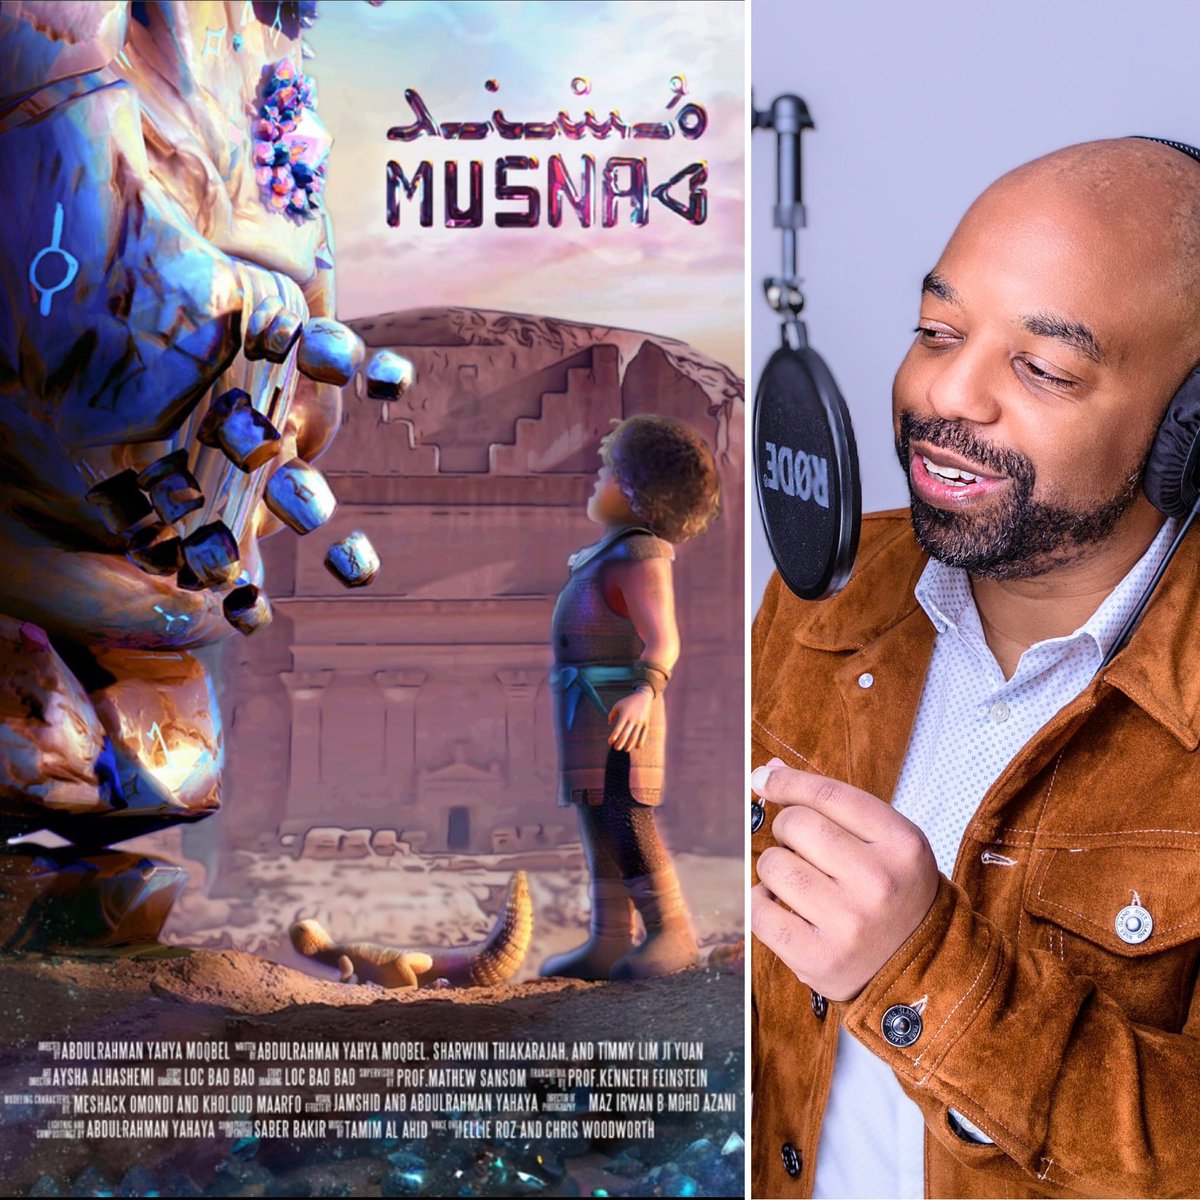 Over 3 years ago, @Ellie_Rodz and I began our #voiceover career. We both voiced the main characters in an animated short called “Musnad”. It was one of our first voiceover jobs. It has been accepted by The Saudi Film Festival! Congrats to the creators! 🎉